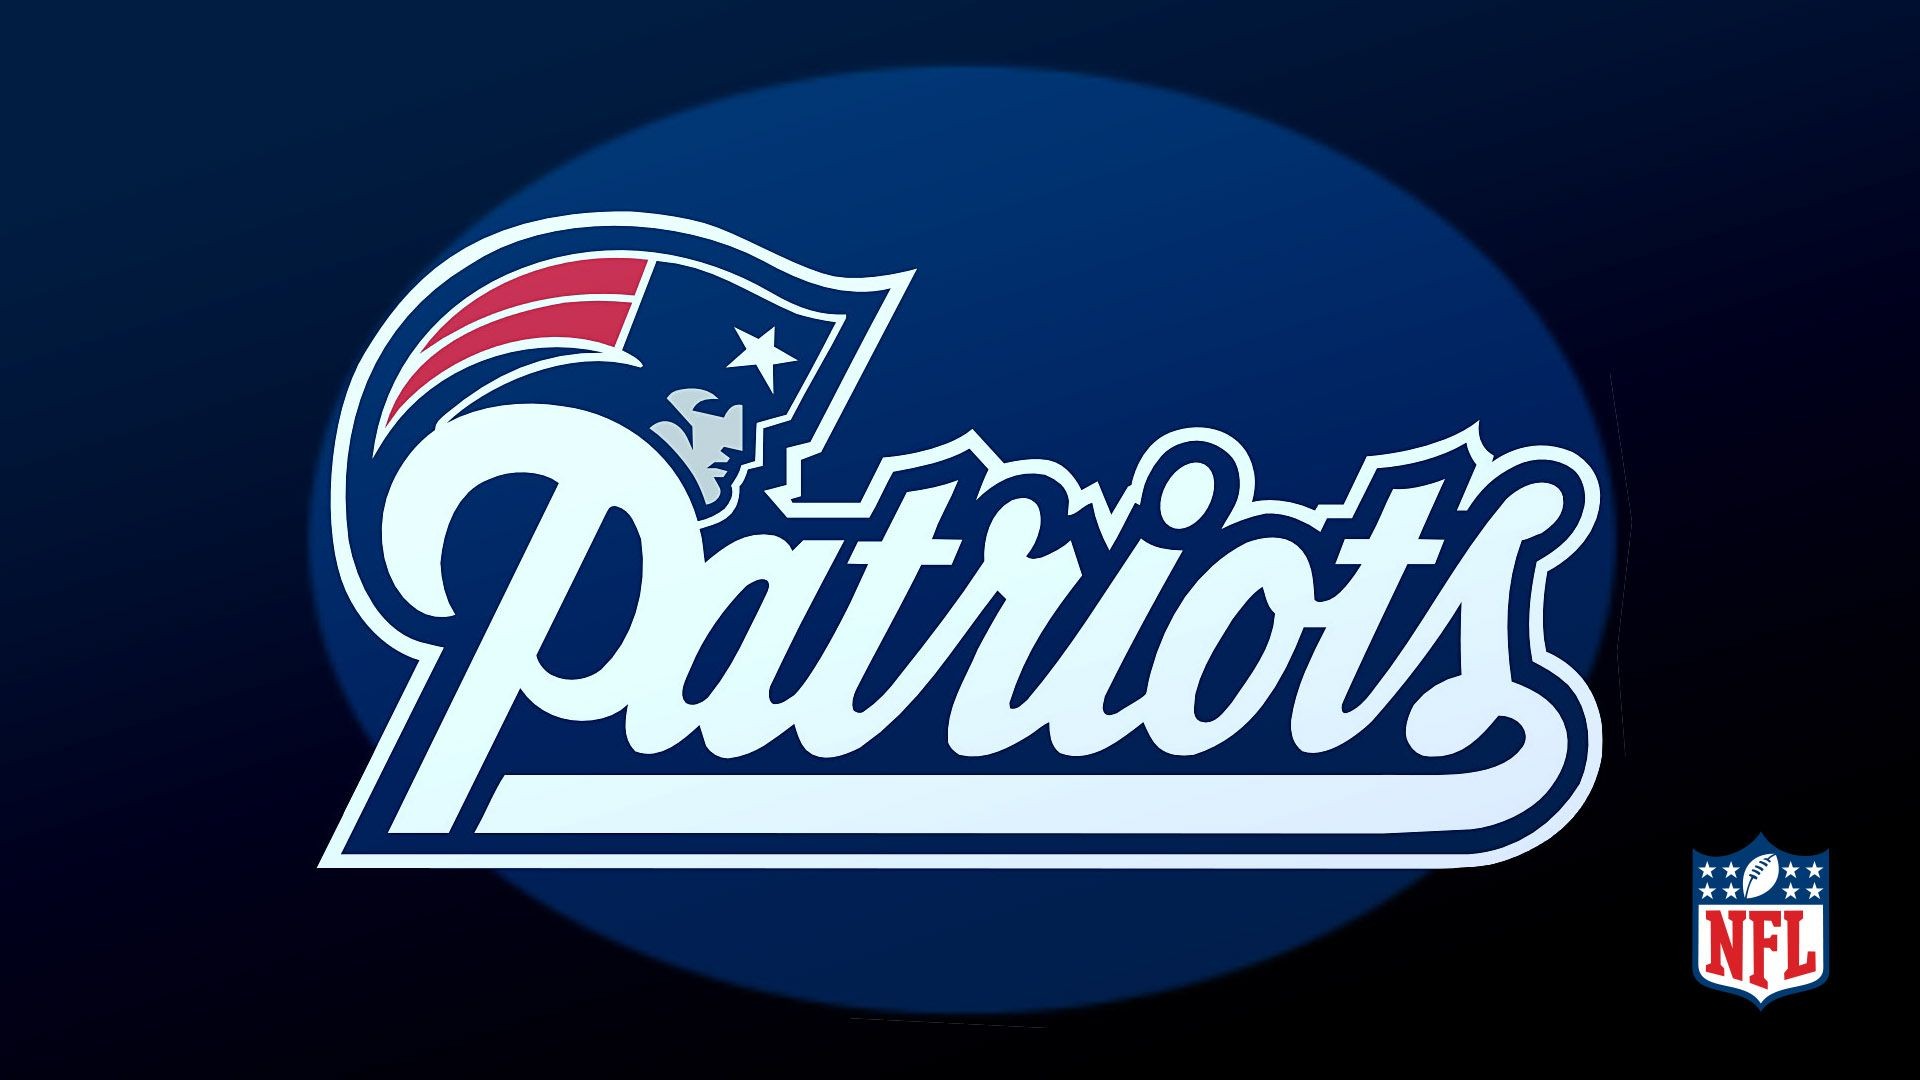 HD New England Patriots Backgrounds With high-resolution 1920X1080 pixel. Download and set as wallpaper for Desktop Computer, Apple iPhone X, XS Max, XR, 8, 7, 6, SE, iPad, Android